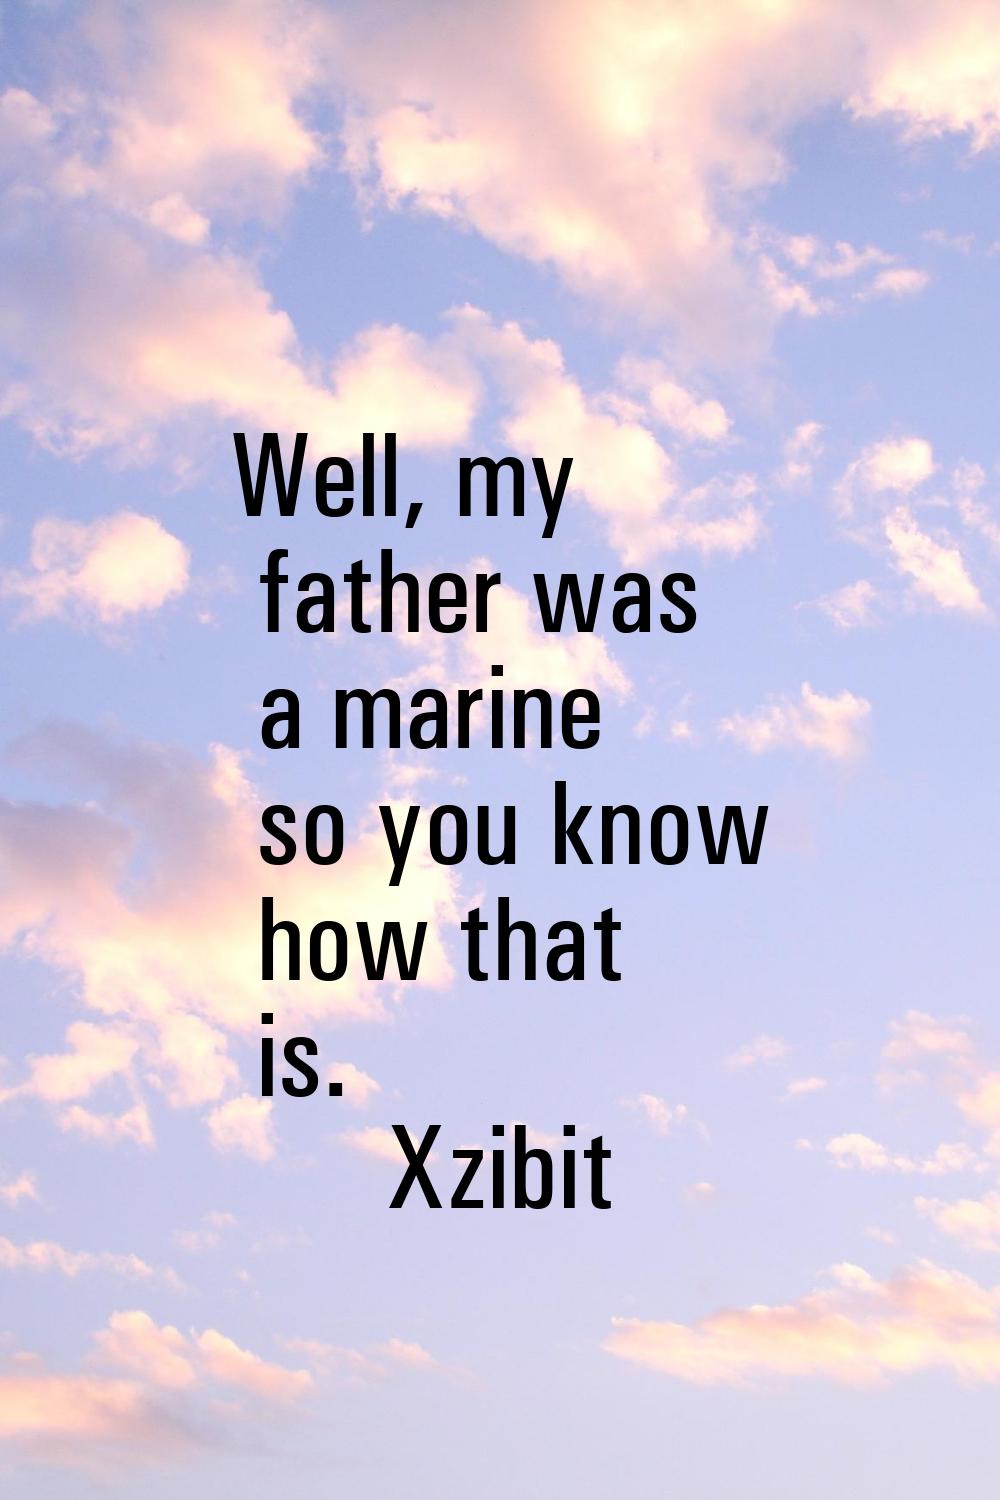 Well, my father was a marine so you know how that is.